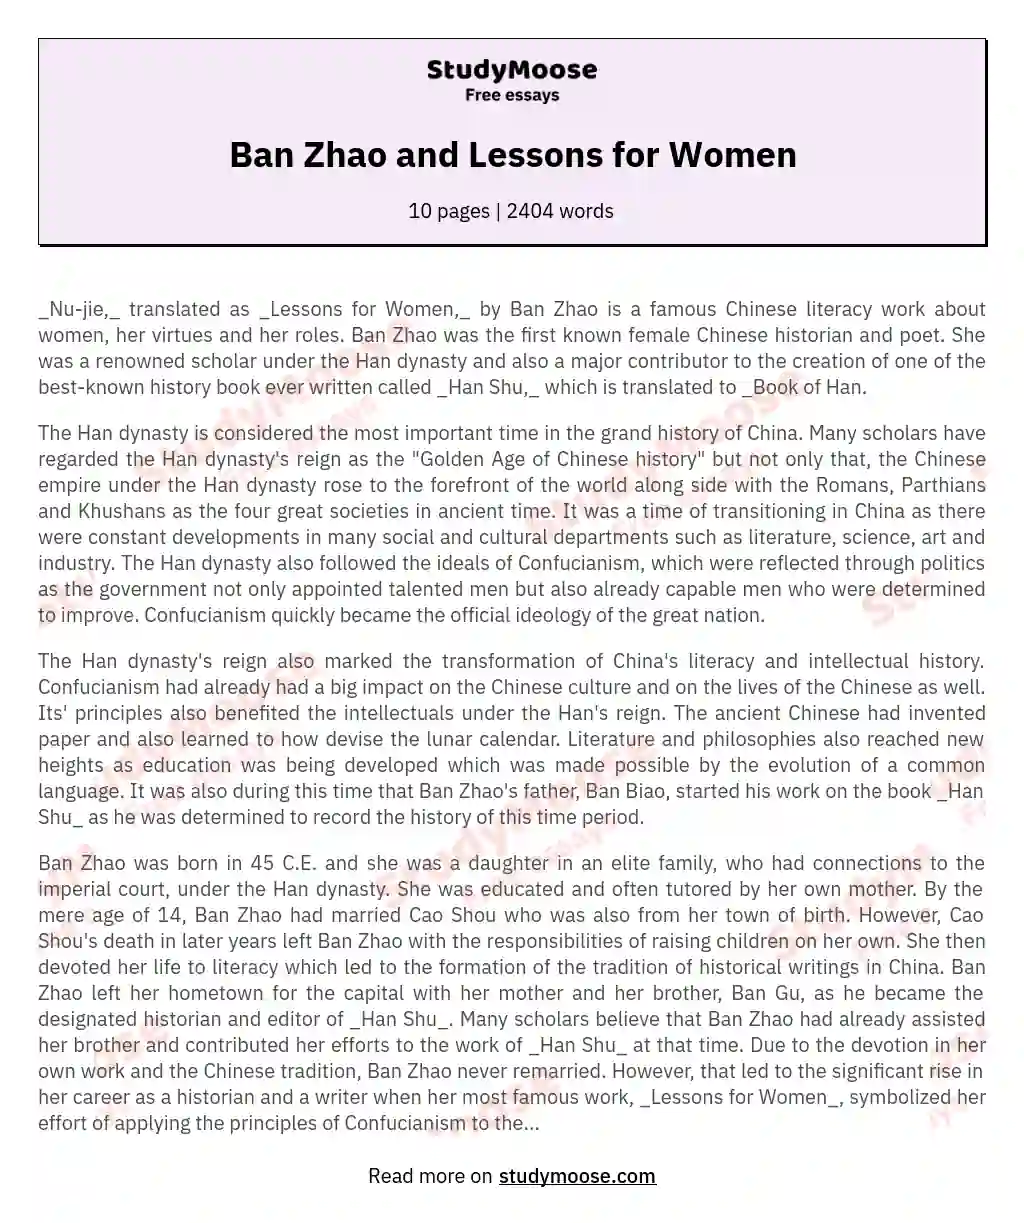 Ban Zhao and Lessons for Women essay